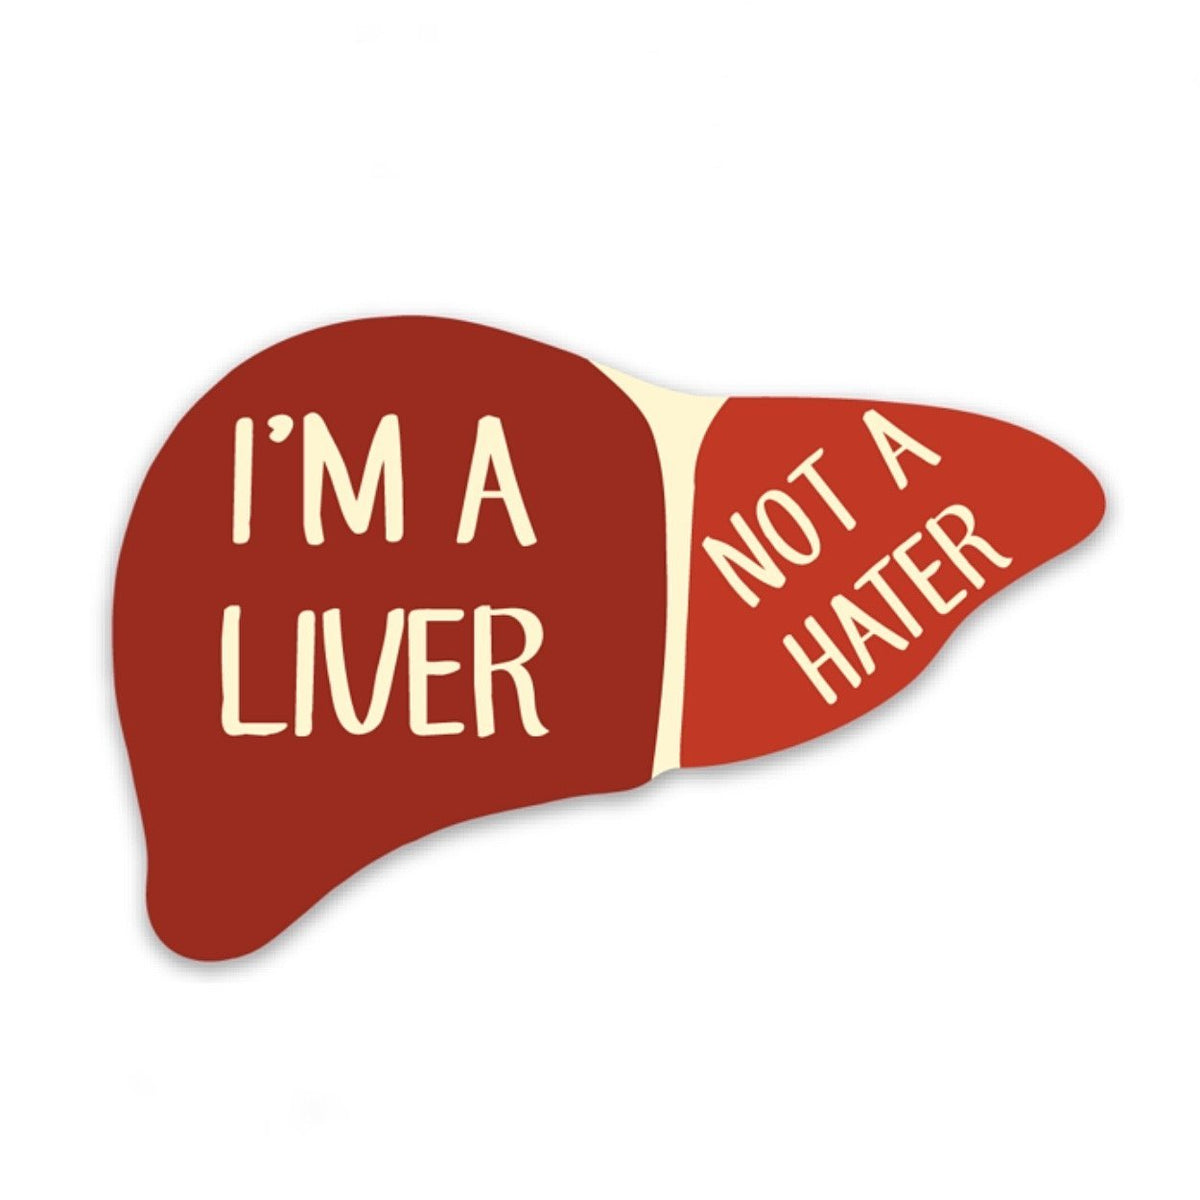 Liver, Not a Hater Decal - Rad Girl Creations